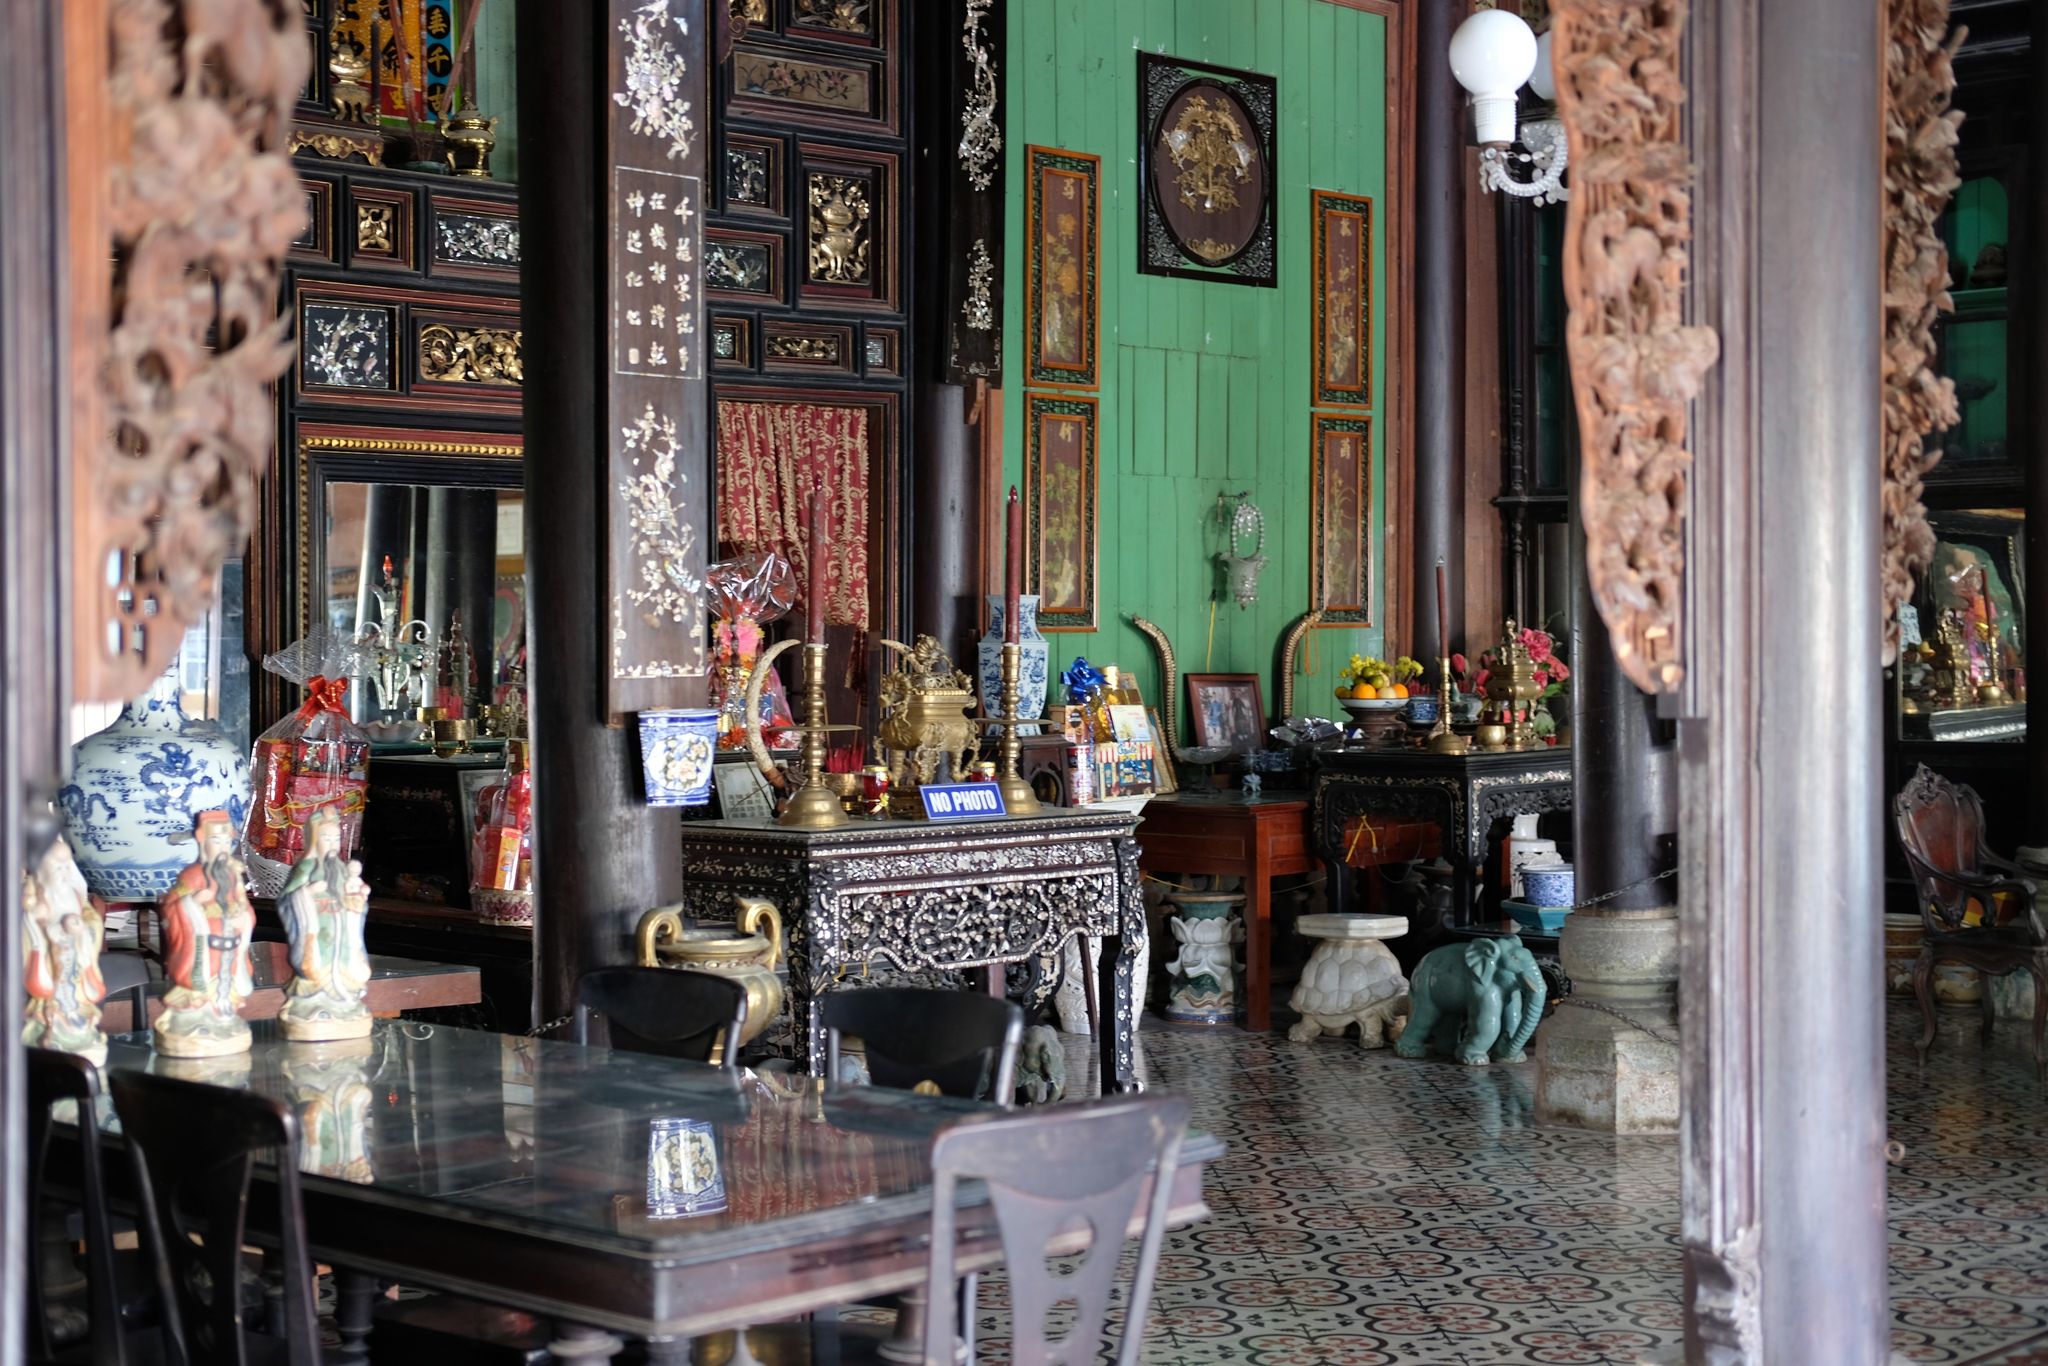 Inside the ancient house of Binh Thuy in Can Tho City, Vietnam. Photo: Tran Phuong / Tuoi Tre News